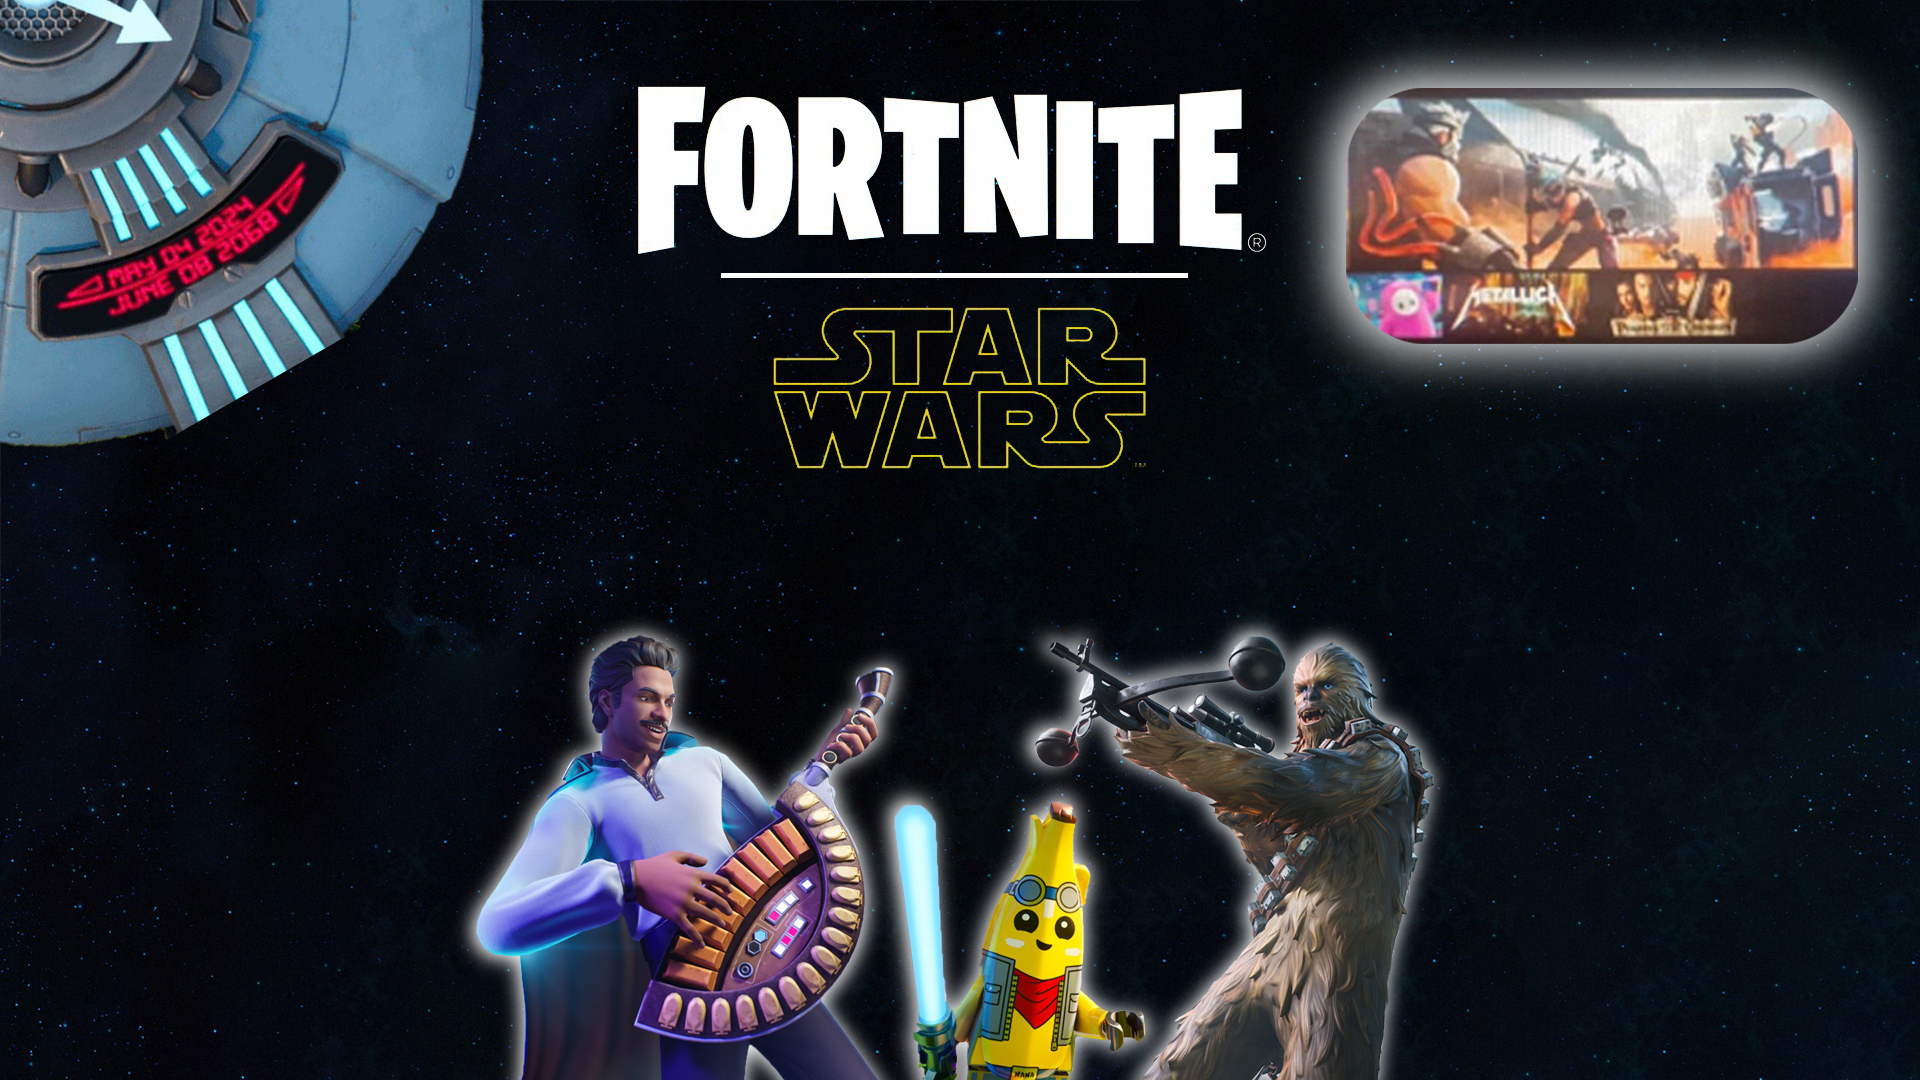 fortnite patch v.29.40: downtime, star wars, billie eilish, festival season 3, new weapons, collabs & more